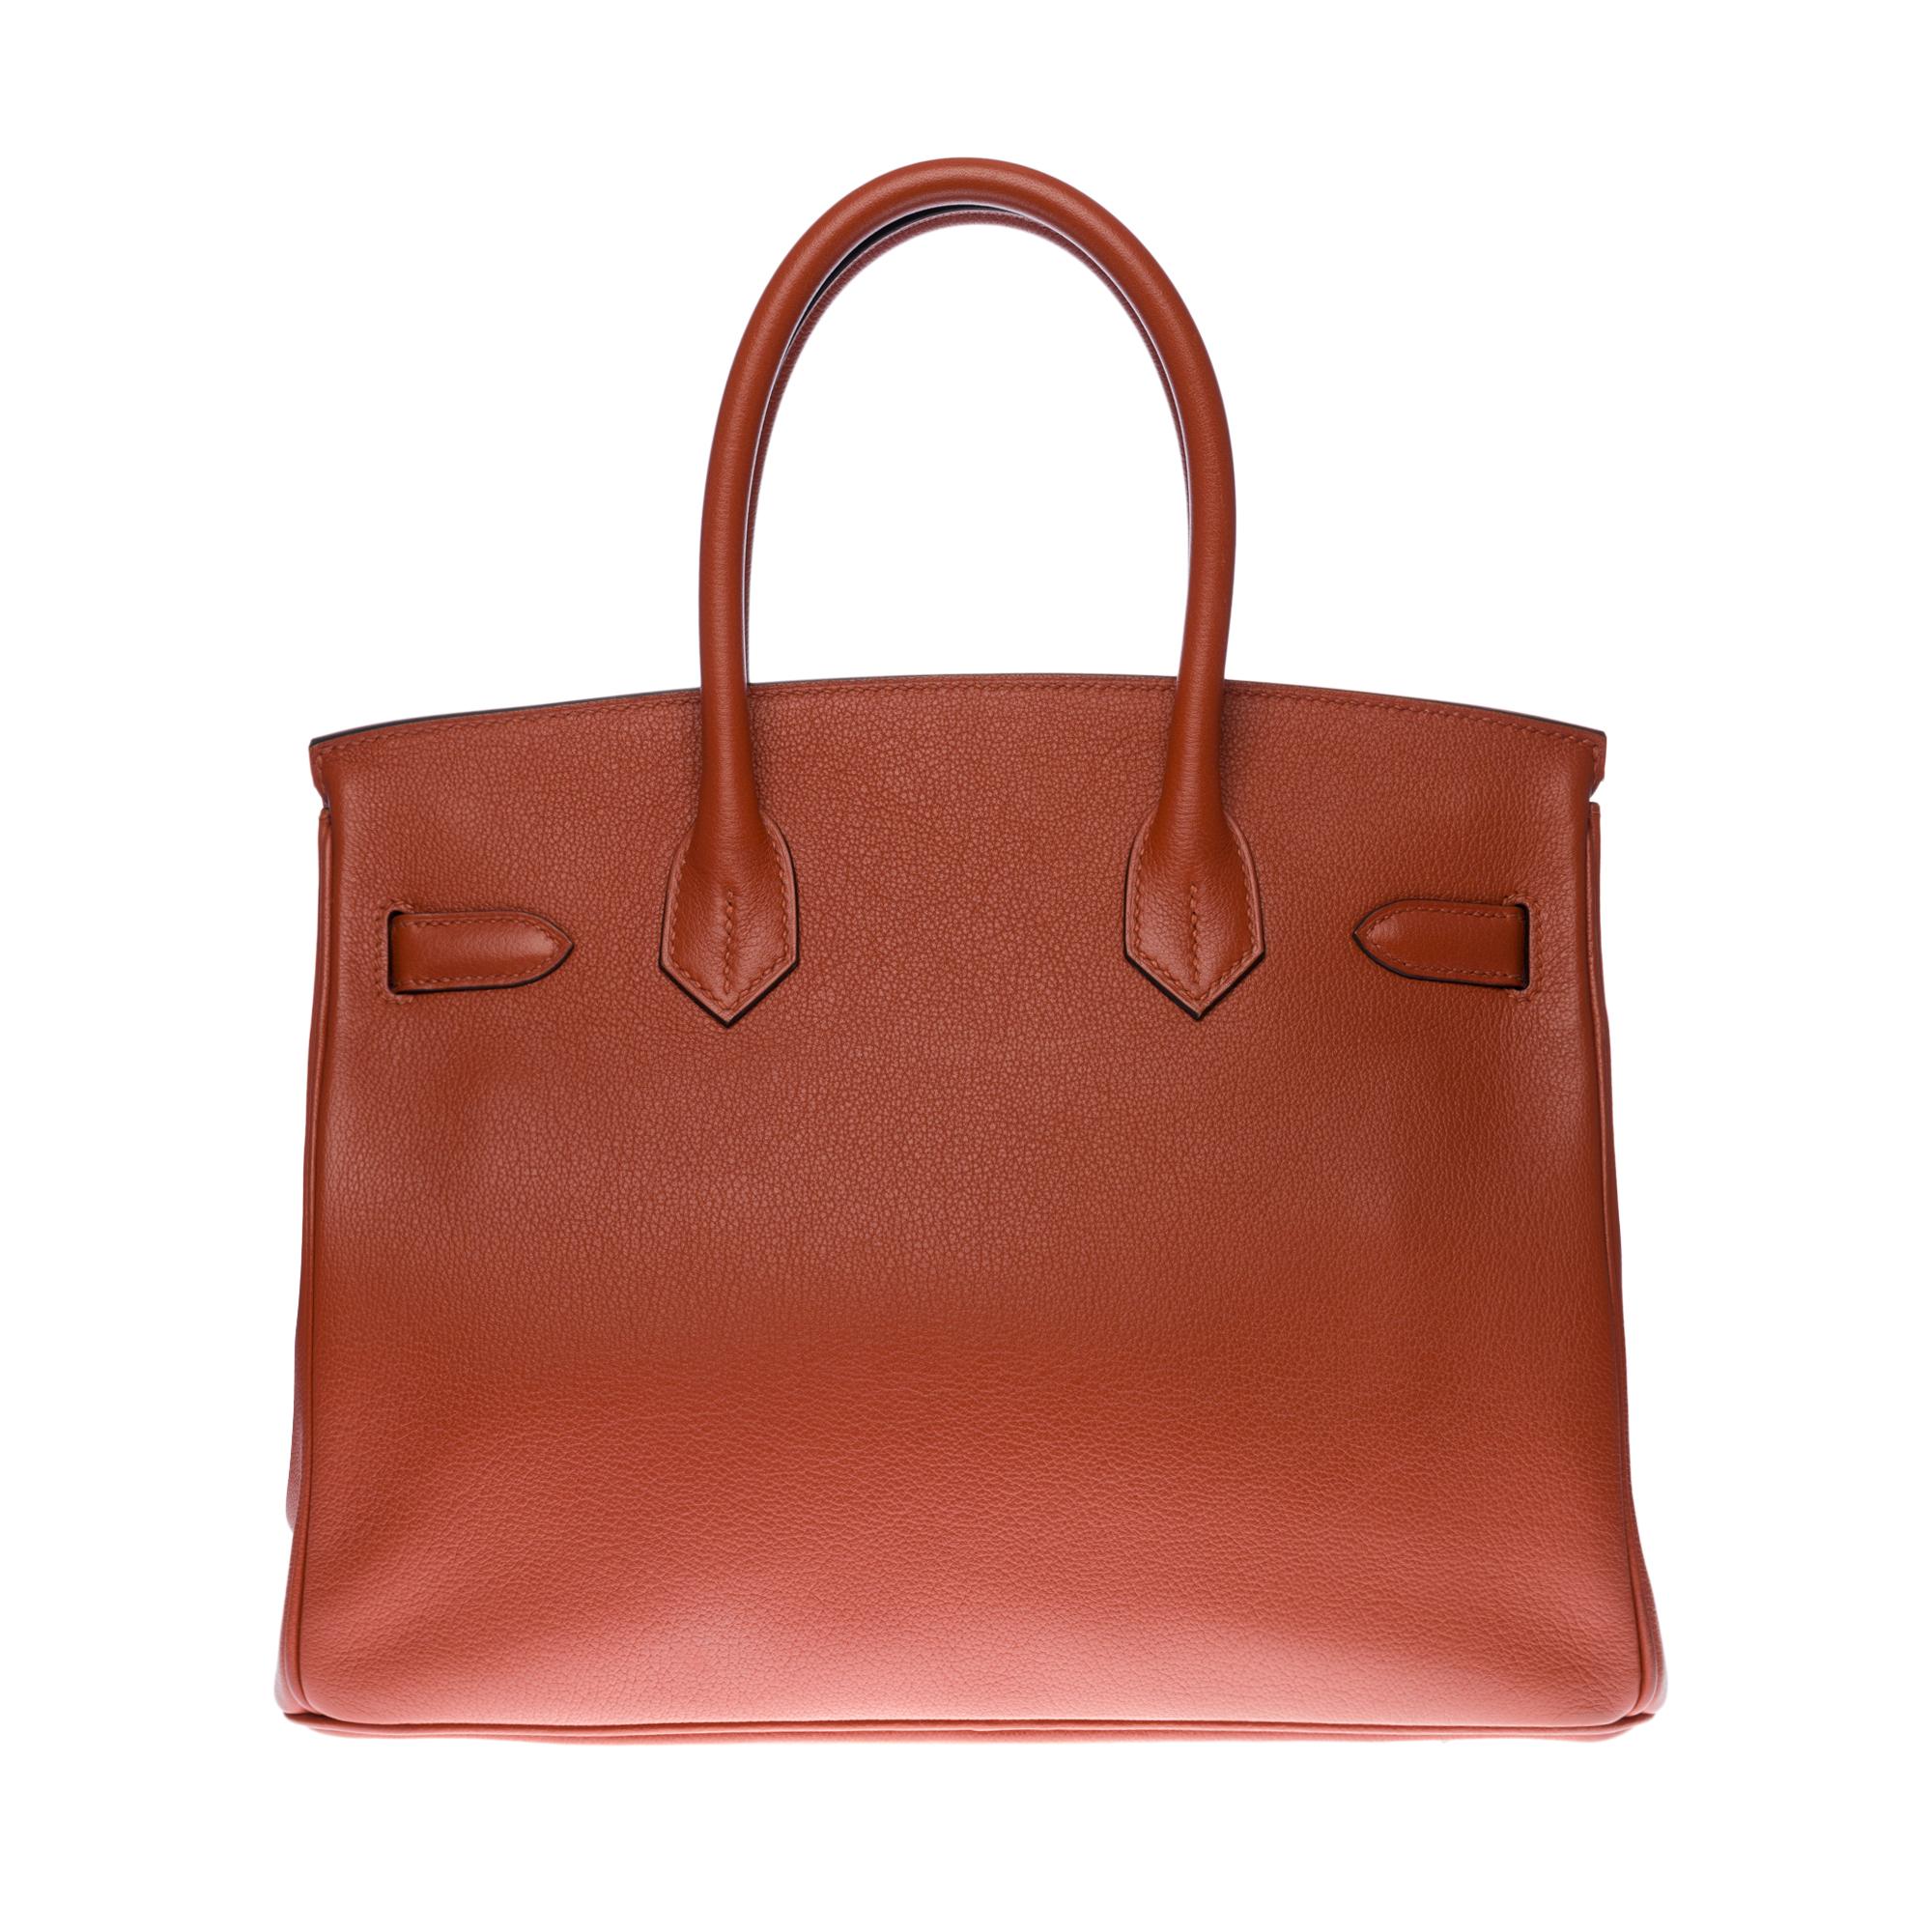 Beautiful Hermes Birkin 30 cm handbag in Mysore Goat Cuivre (goat leather is known for its sturdiness and lightness), Palladium silver metal hardware, double copper leather handle allowing a hand carry

Flap closure
Inner lining in copper leather,